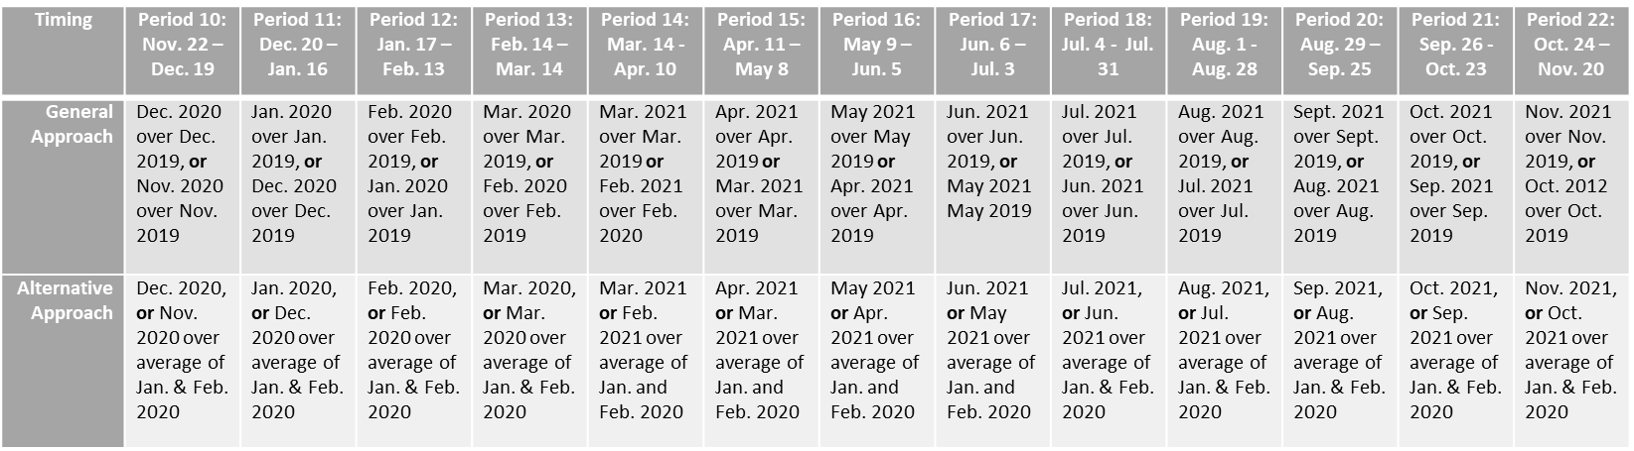 CES - Reference Periods 10-22